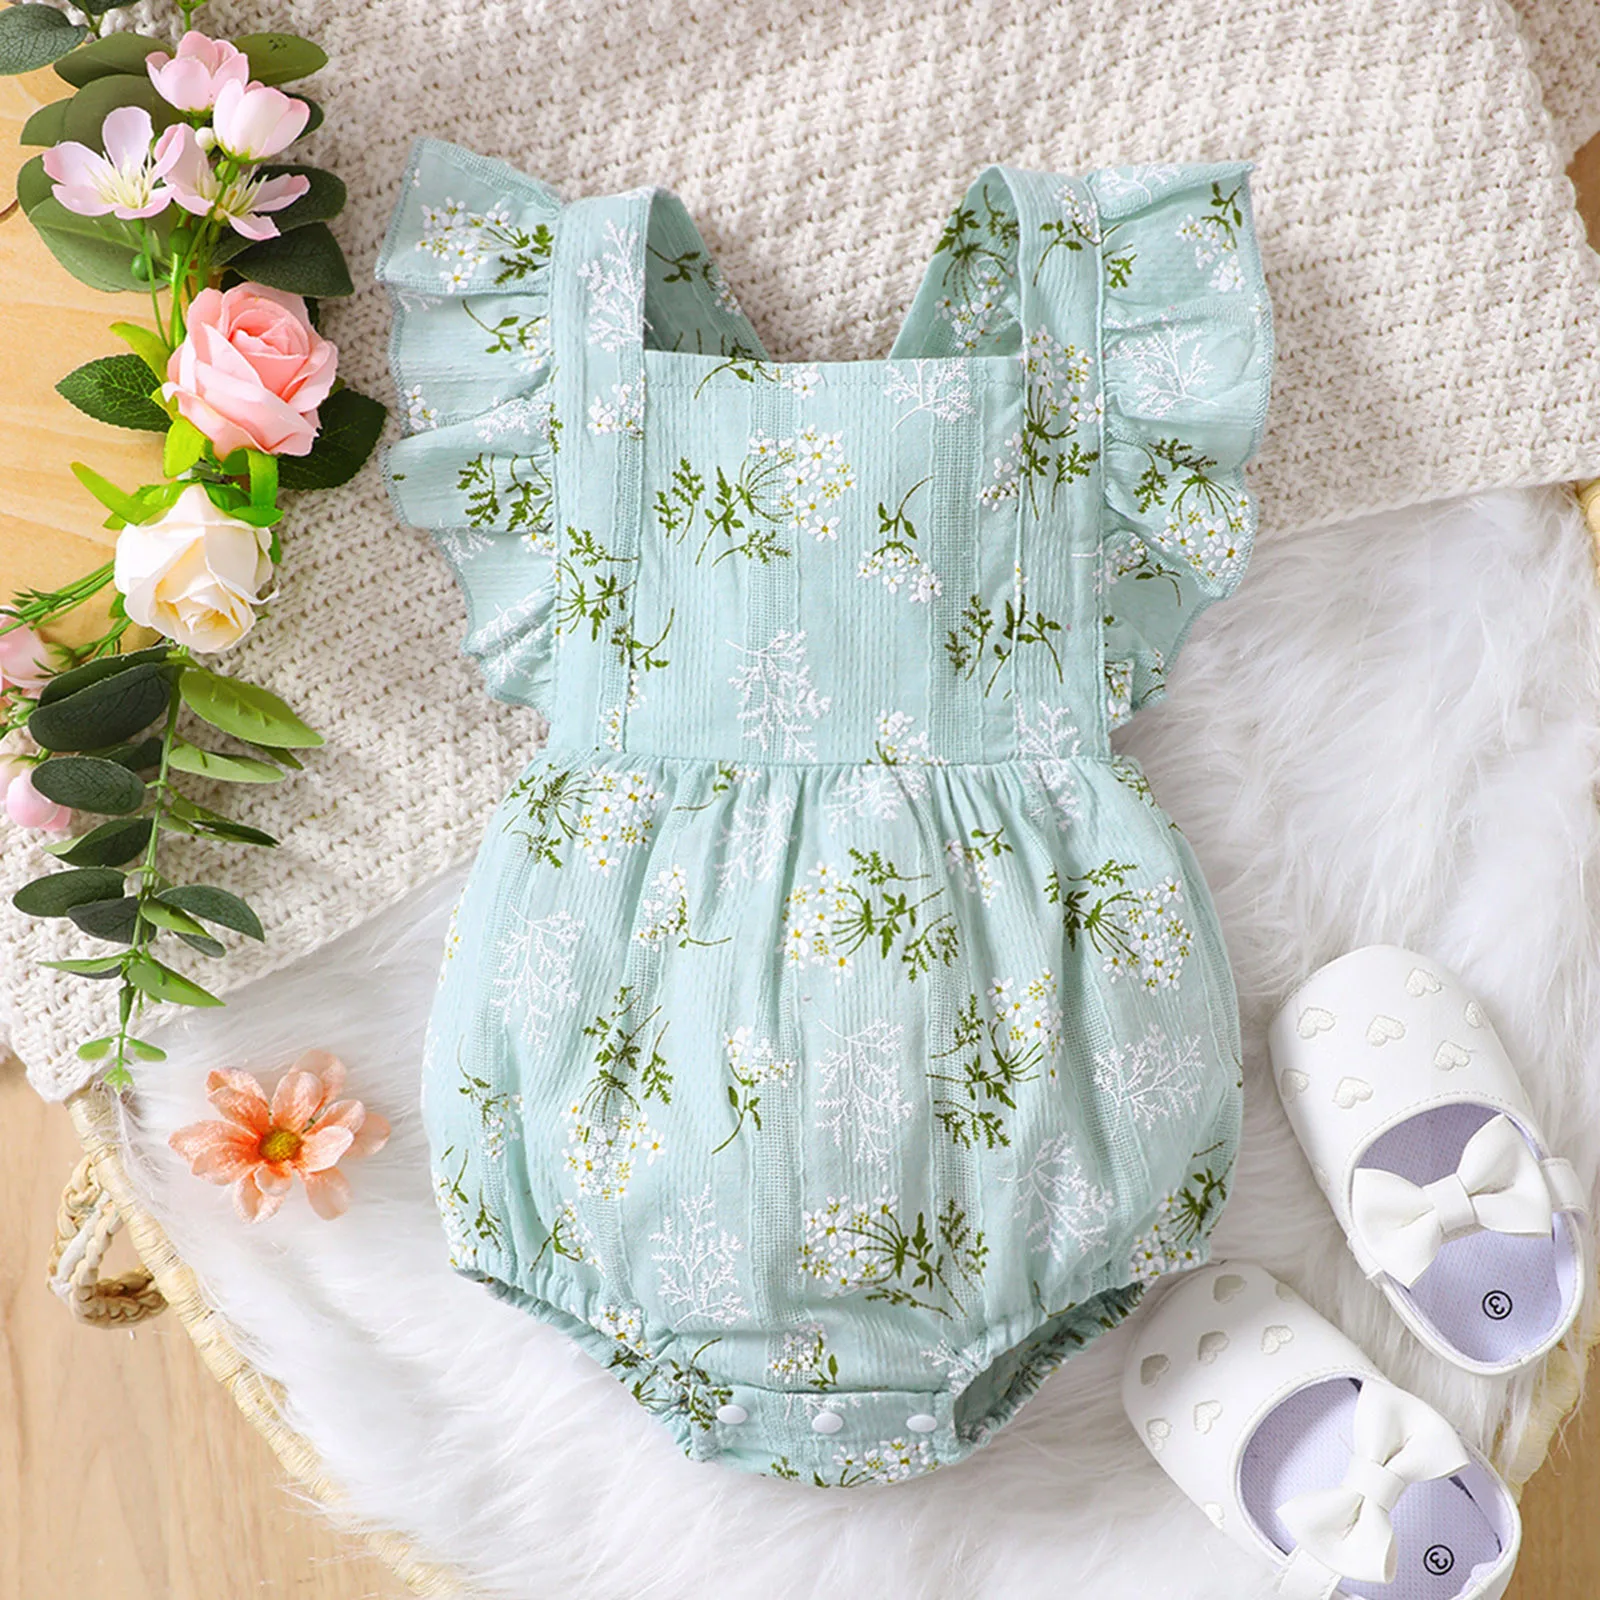 

Infant Baby Girls Rompers Summer Fly Sleeve Romper Jumpsuit Toddler Outfits Floral Playsuit Newborn Outfits Clothes 0-24 Months